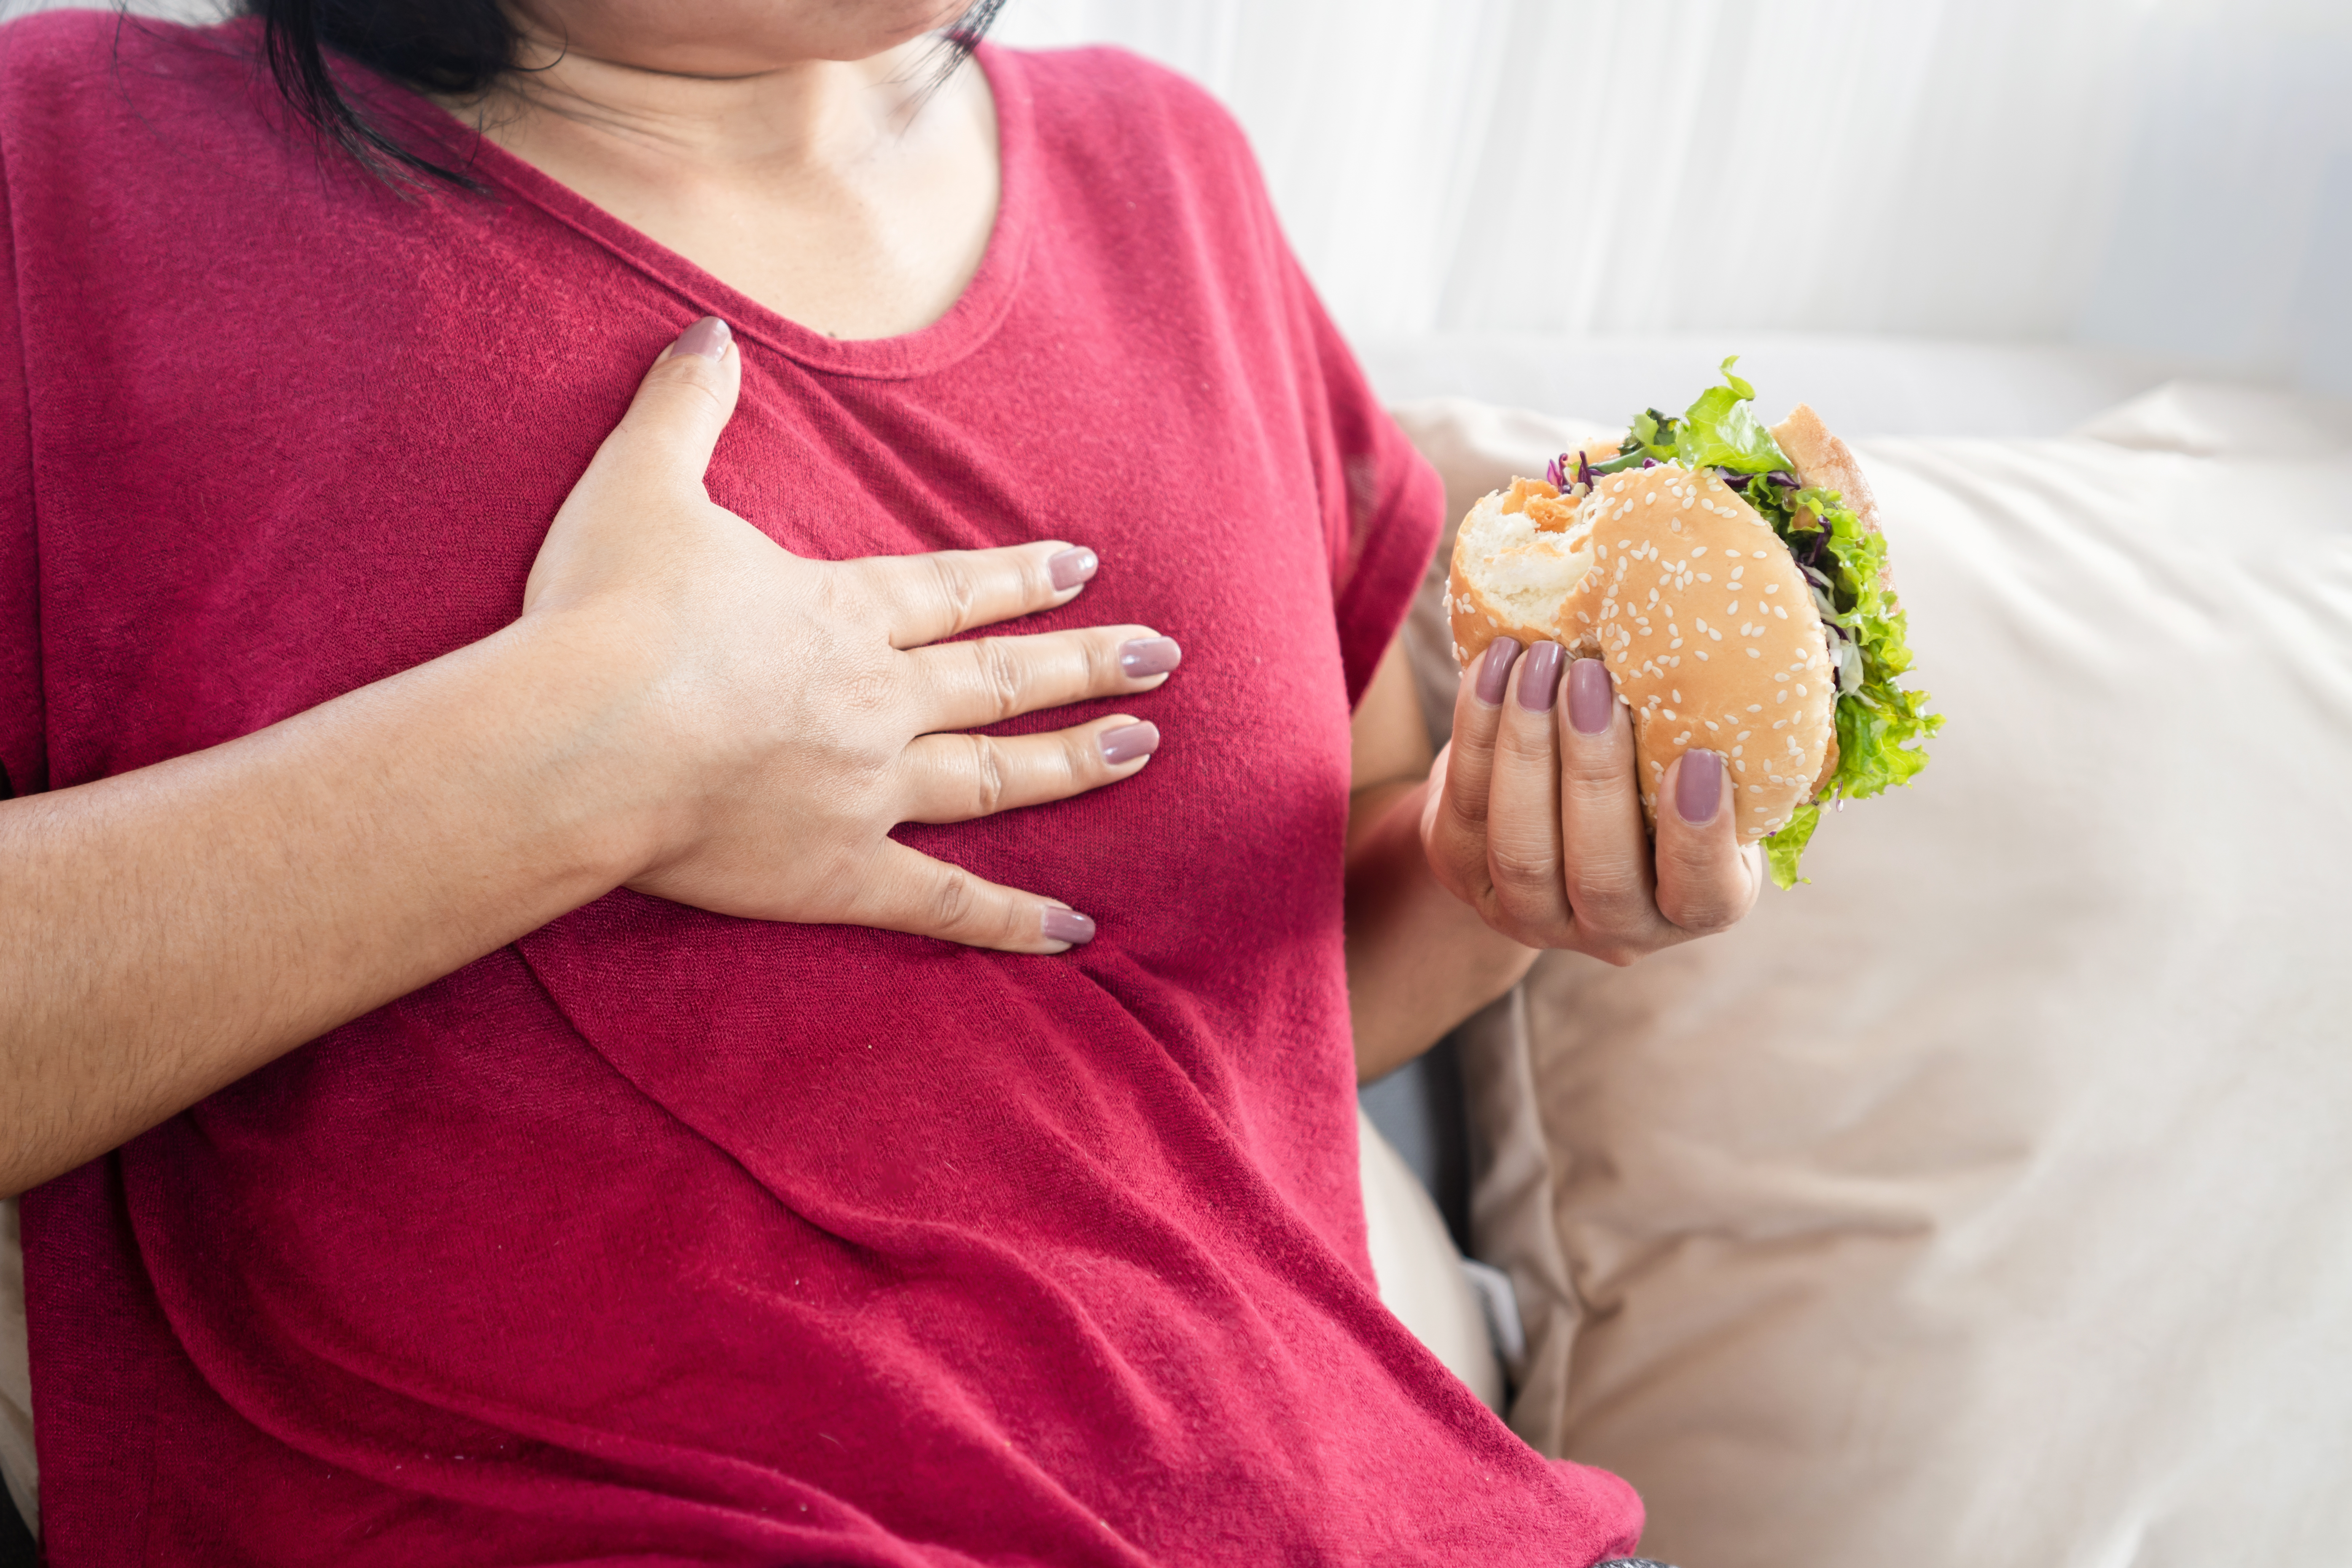 Gastric Problems After Eating Food